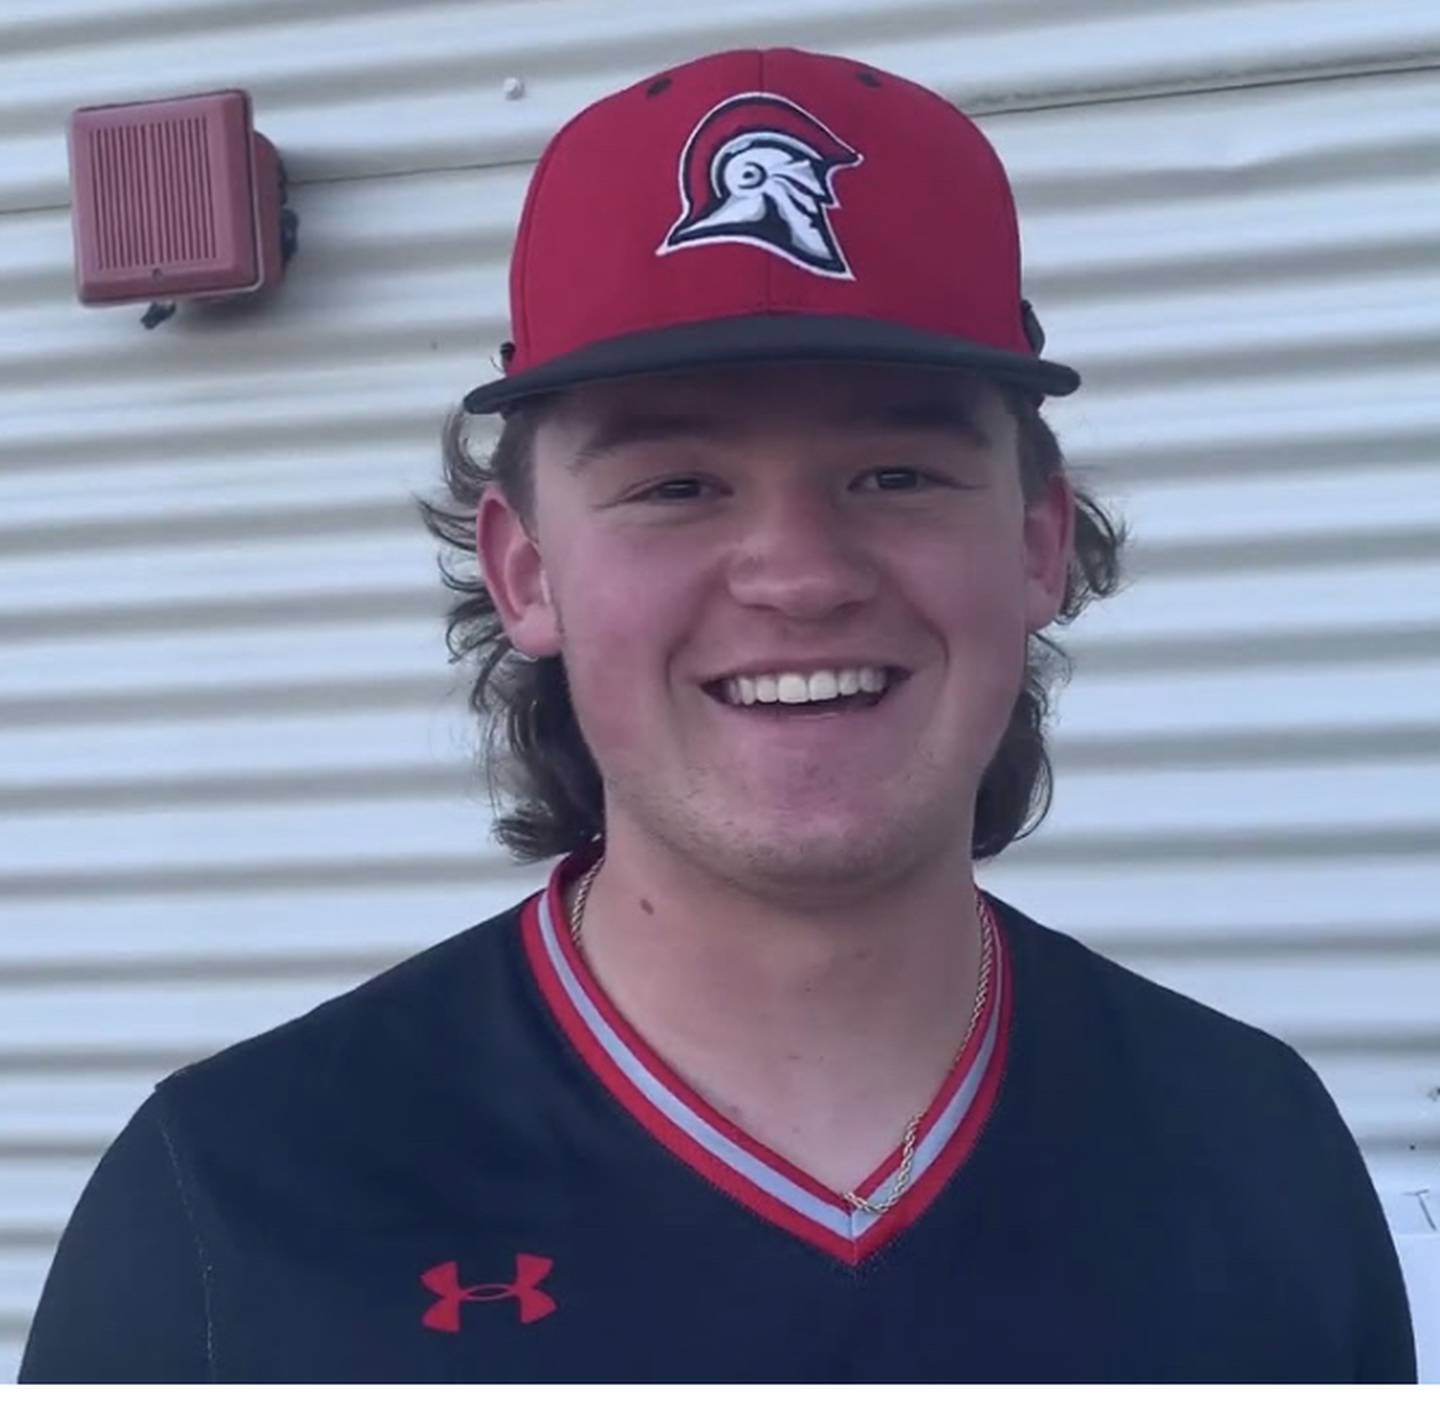 Nick Duvall was a major reason Glenelg won its state baseball championship since 1999 last spring. He went 4-1 on the mound with a 0.35 ERA and drove in 27 runs, including a game-breaking 3-run double in the sixth inning of the Gladiators' 4-1 Class 2A state championship win over Patuxent.